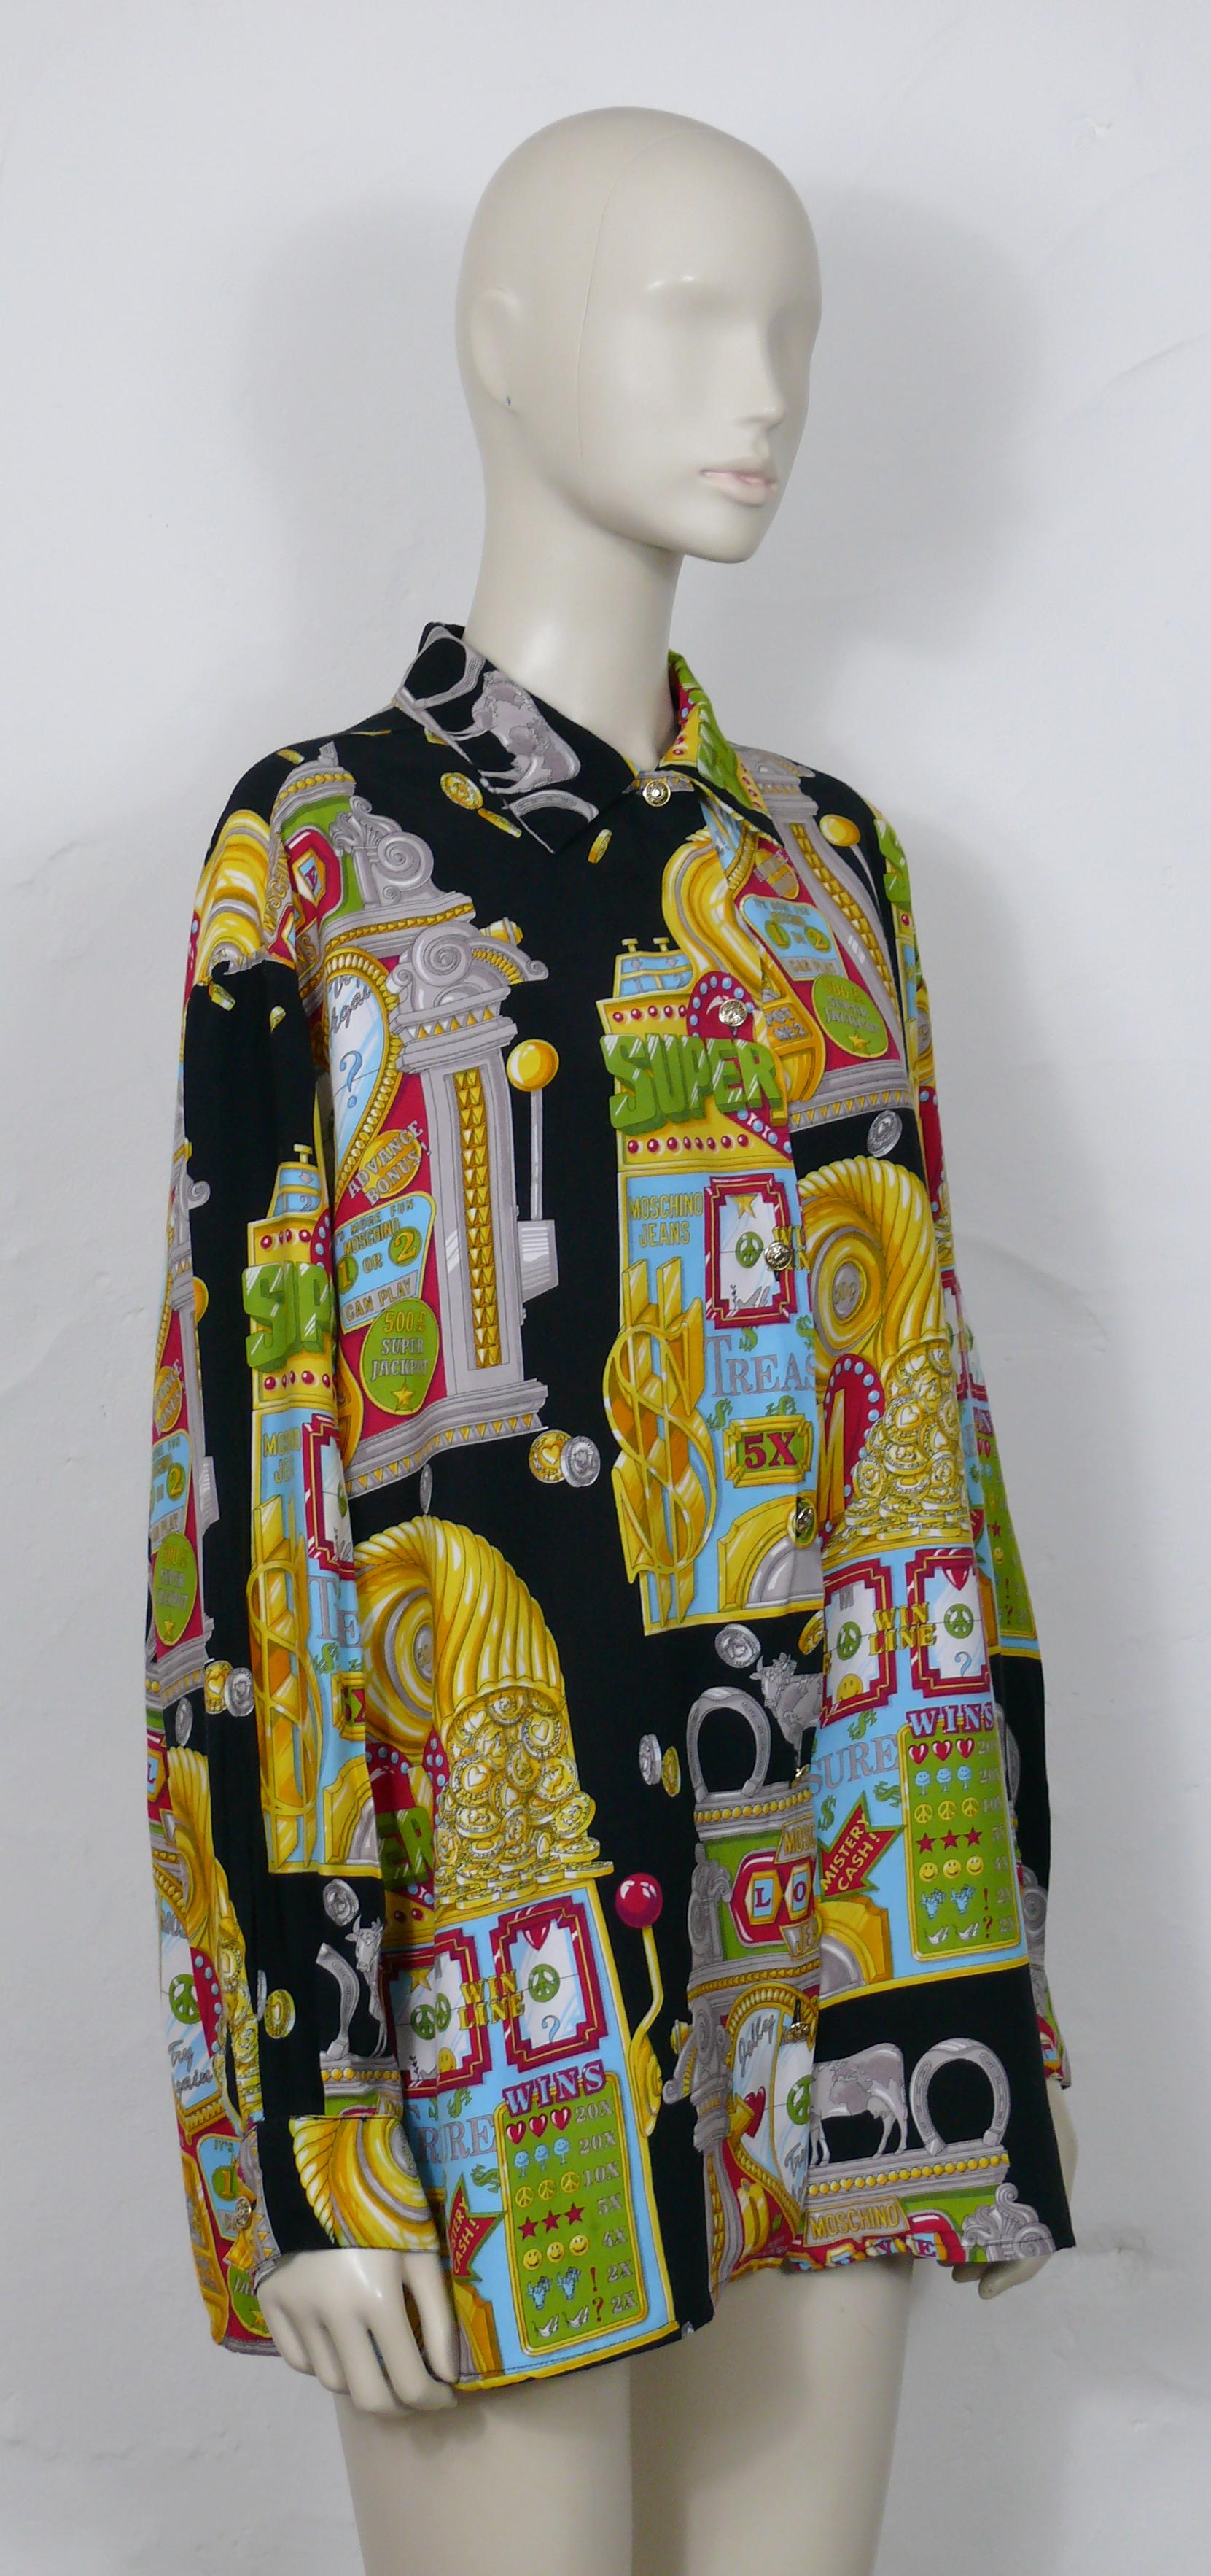 MOSCHINO vintage shirt featuring an opulent multicolor print of a slotter casino game on a black background.

Long sleeves.
Button down closure.
Cuff buttoning.

Label reads MOSCHINO JEANS.
Made in Italy.

Size tag reads : I 48 / USA 14 / F 44 / GB